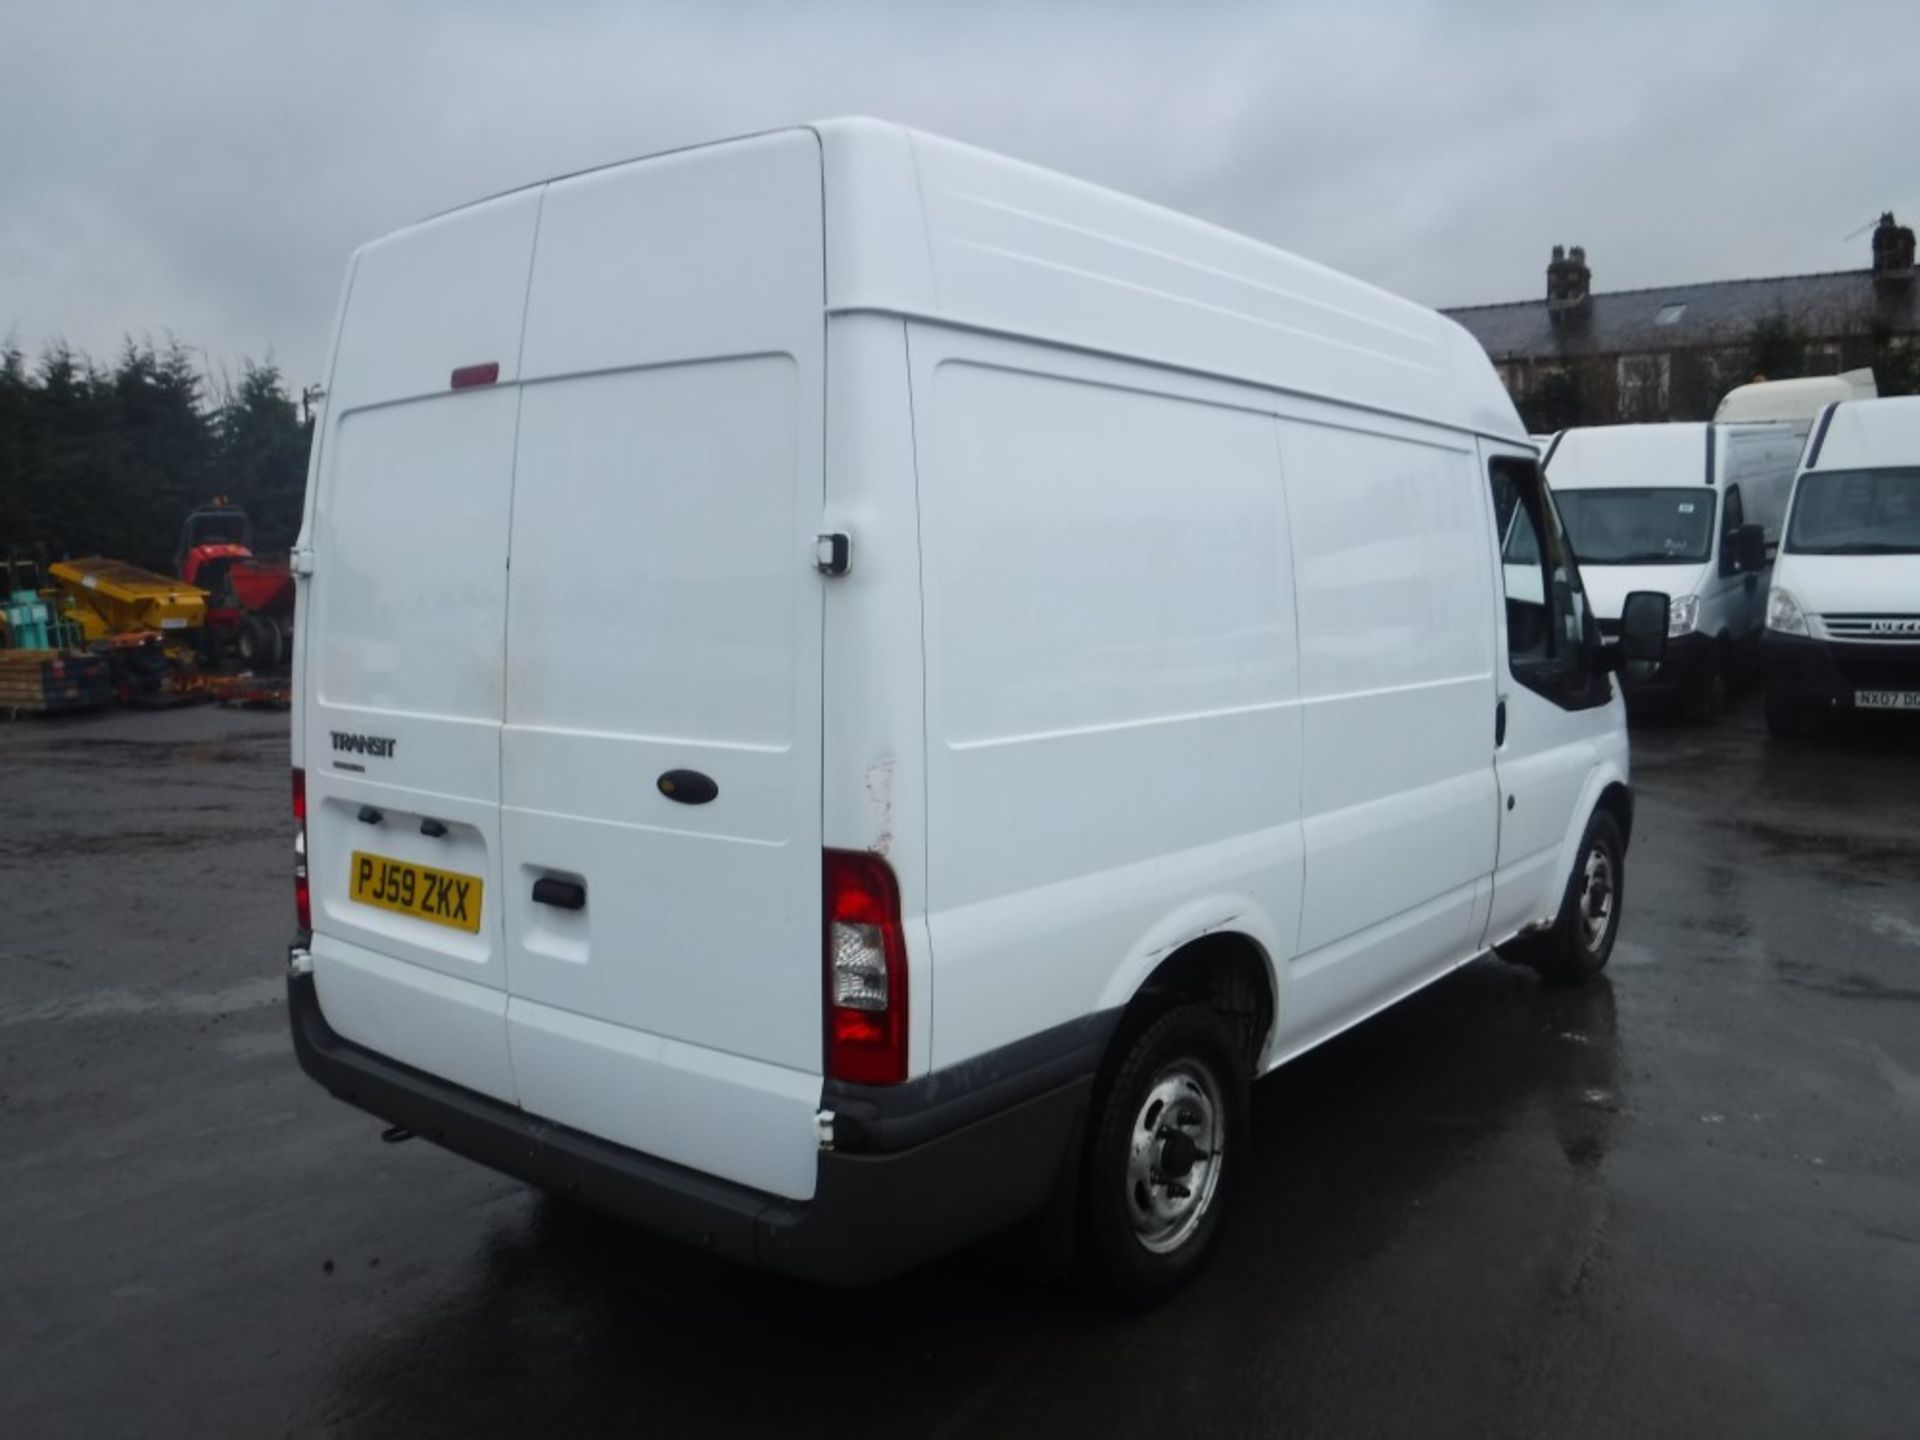 59 reg FORD TRANSIT T280S FWD VAN (DIRECT COUNCIL) 1ST REG 01/10, 78436M, V5 HERE, 1 OWNER FROM - Image 4 of 5